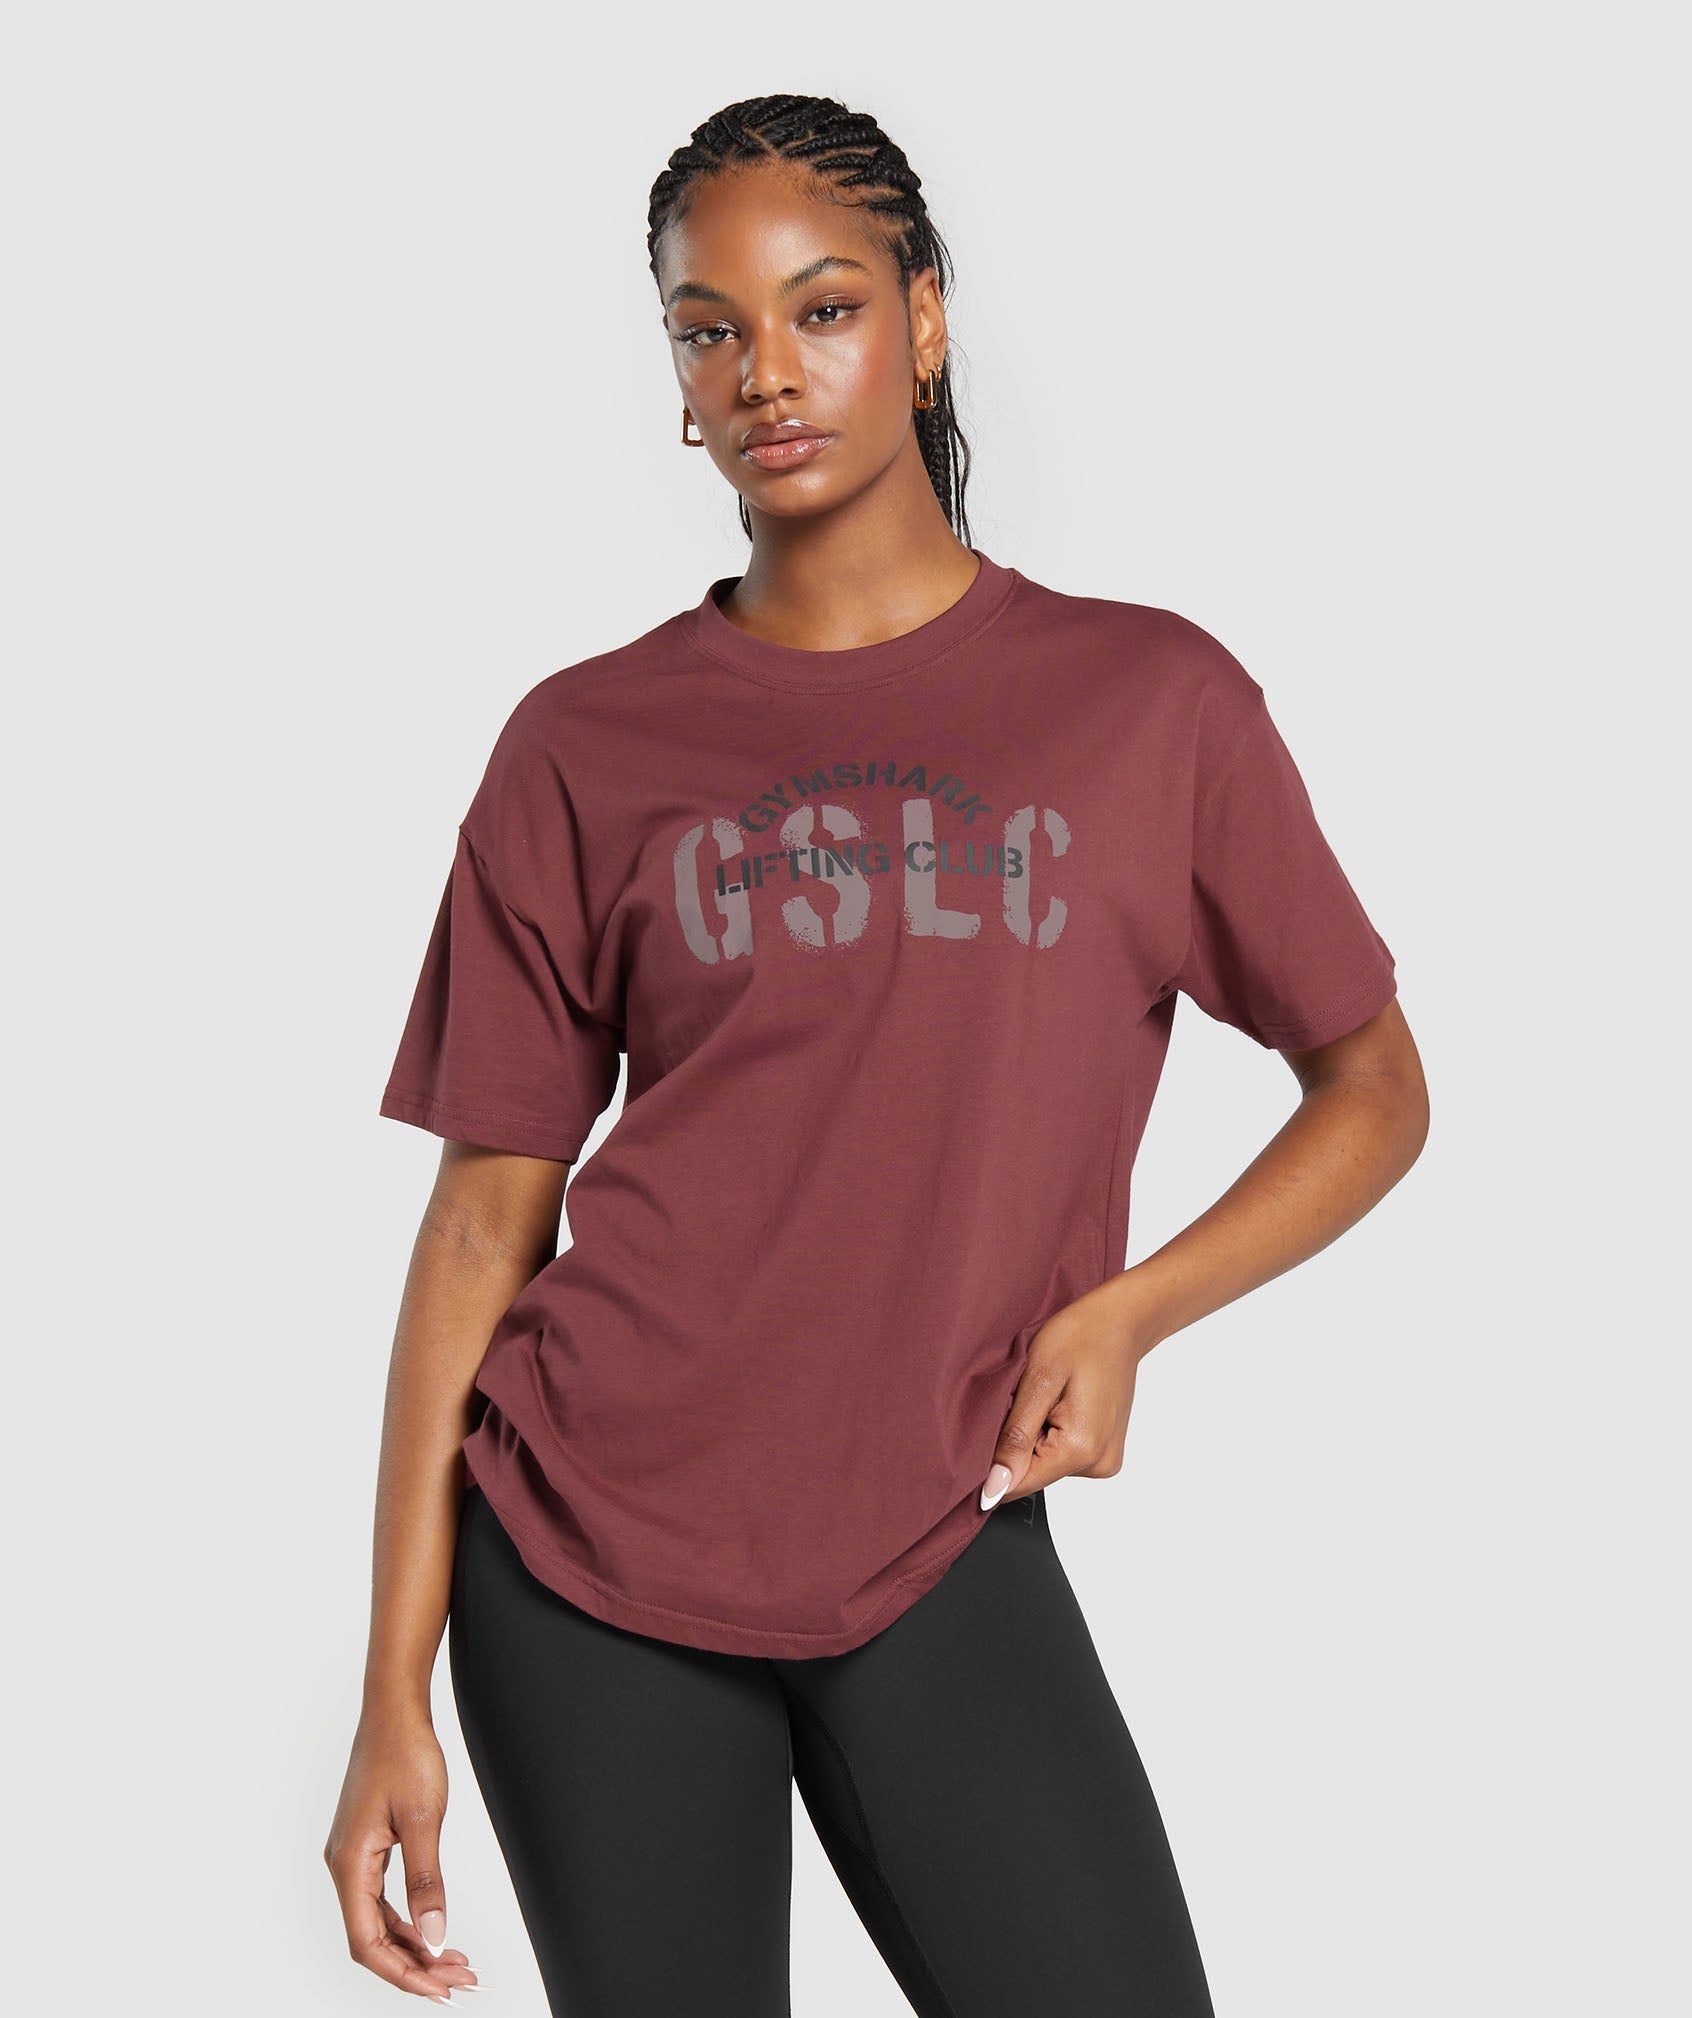 Built Oversized T-Shirt in Washed Burgundy - view 1